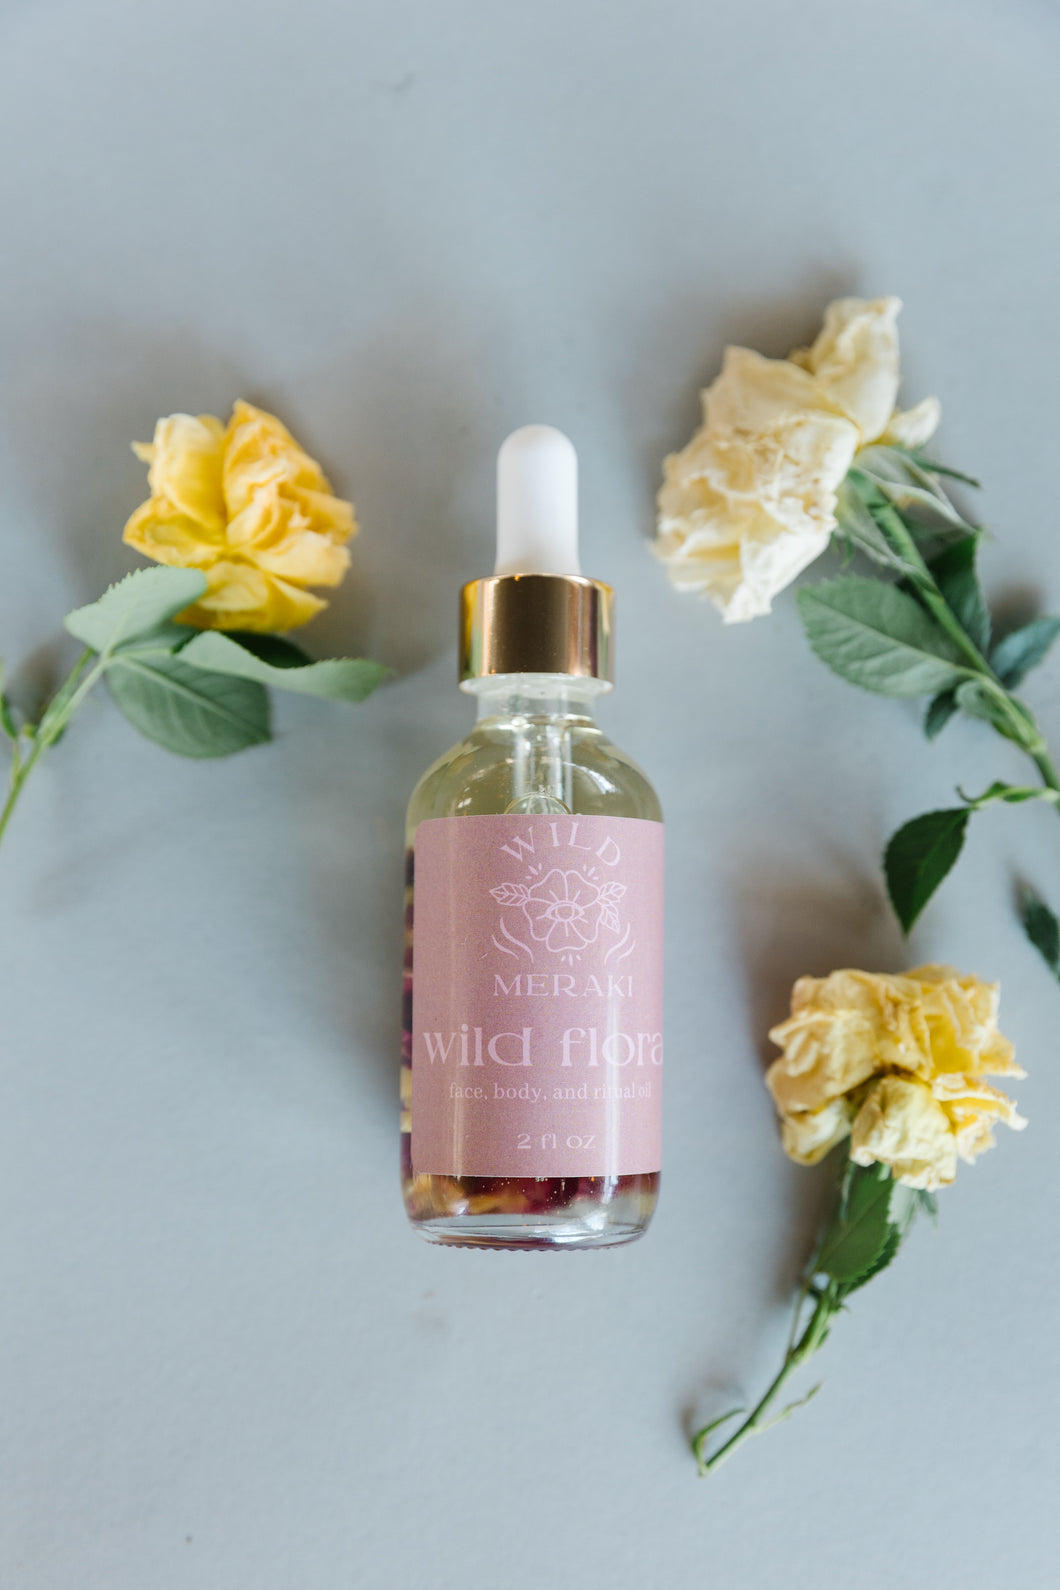 Wild Flora everyday face and ritual oil